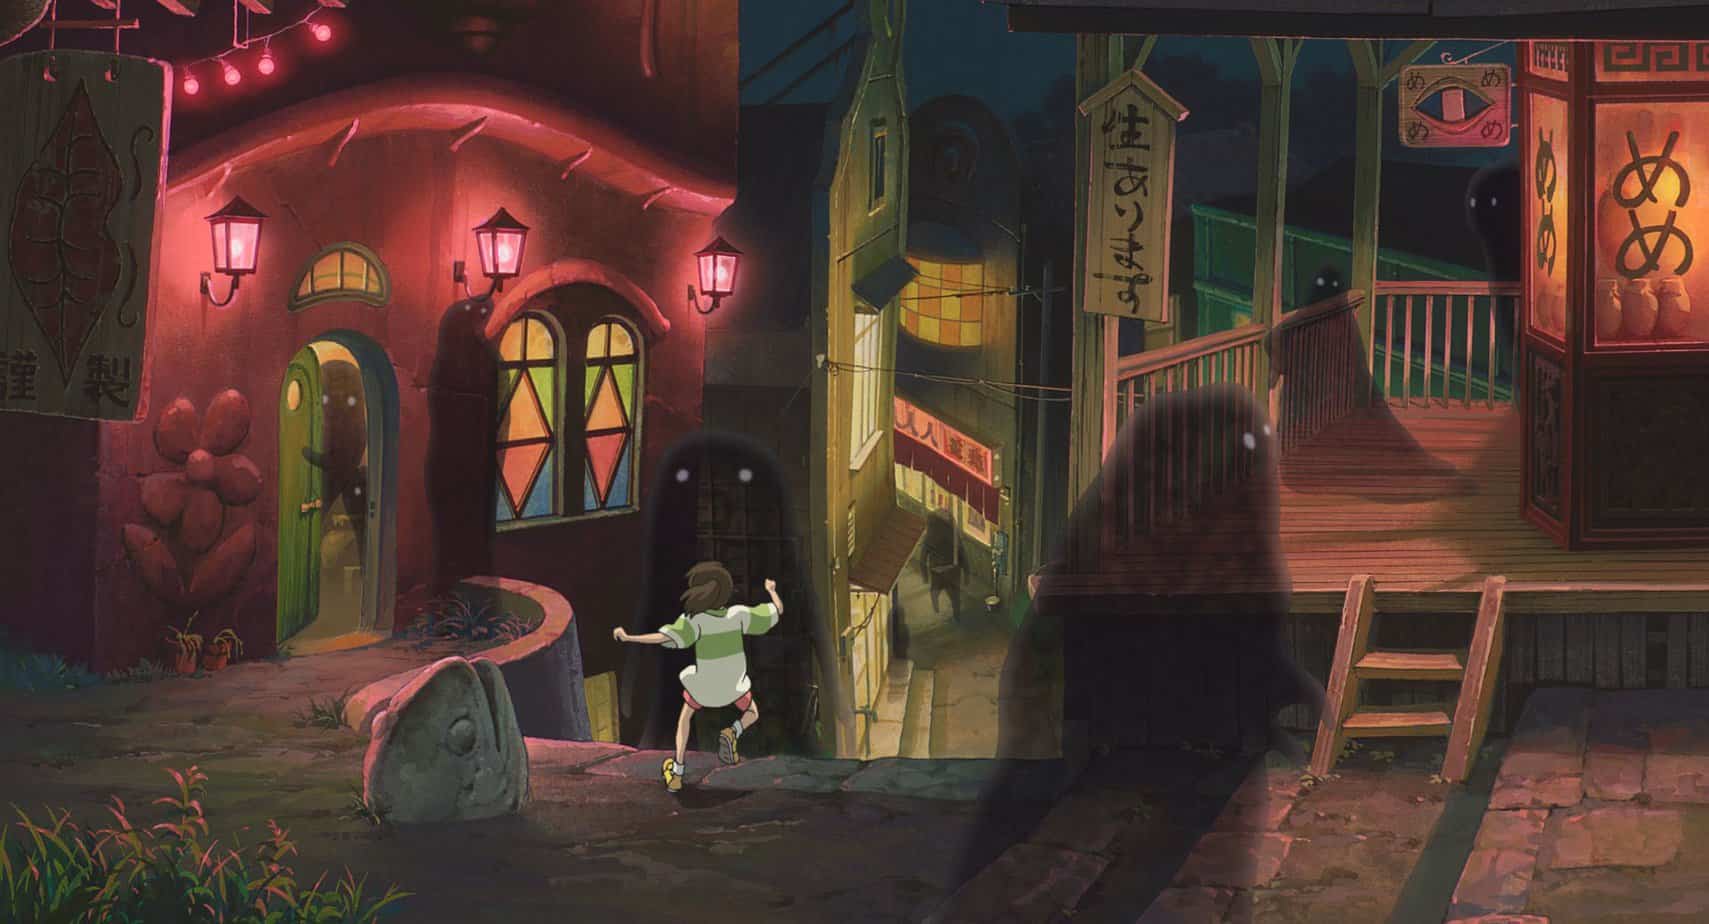 Why Does Spirited Away Feel So Weird To Westerners?